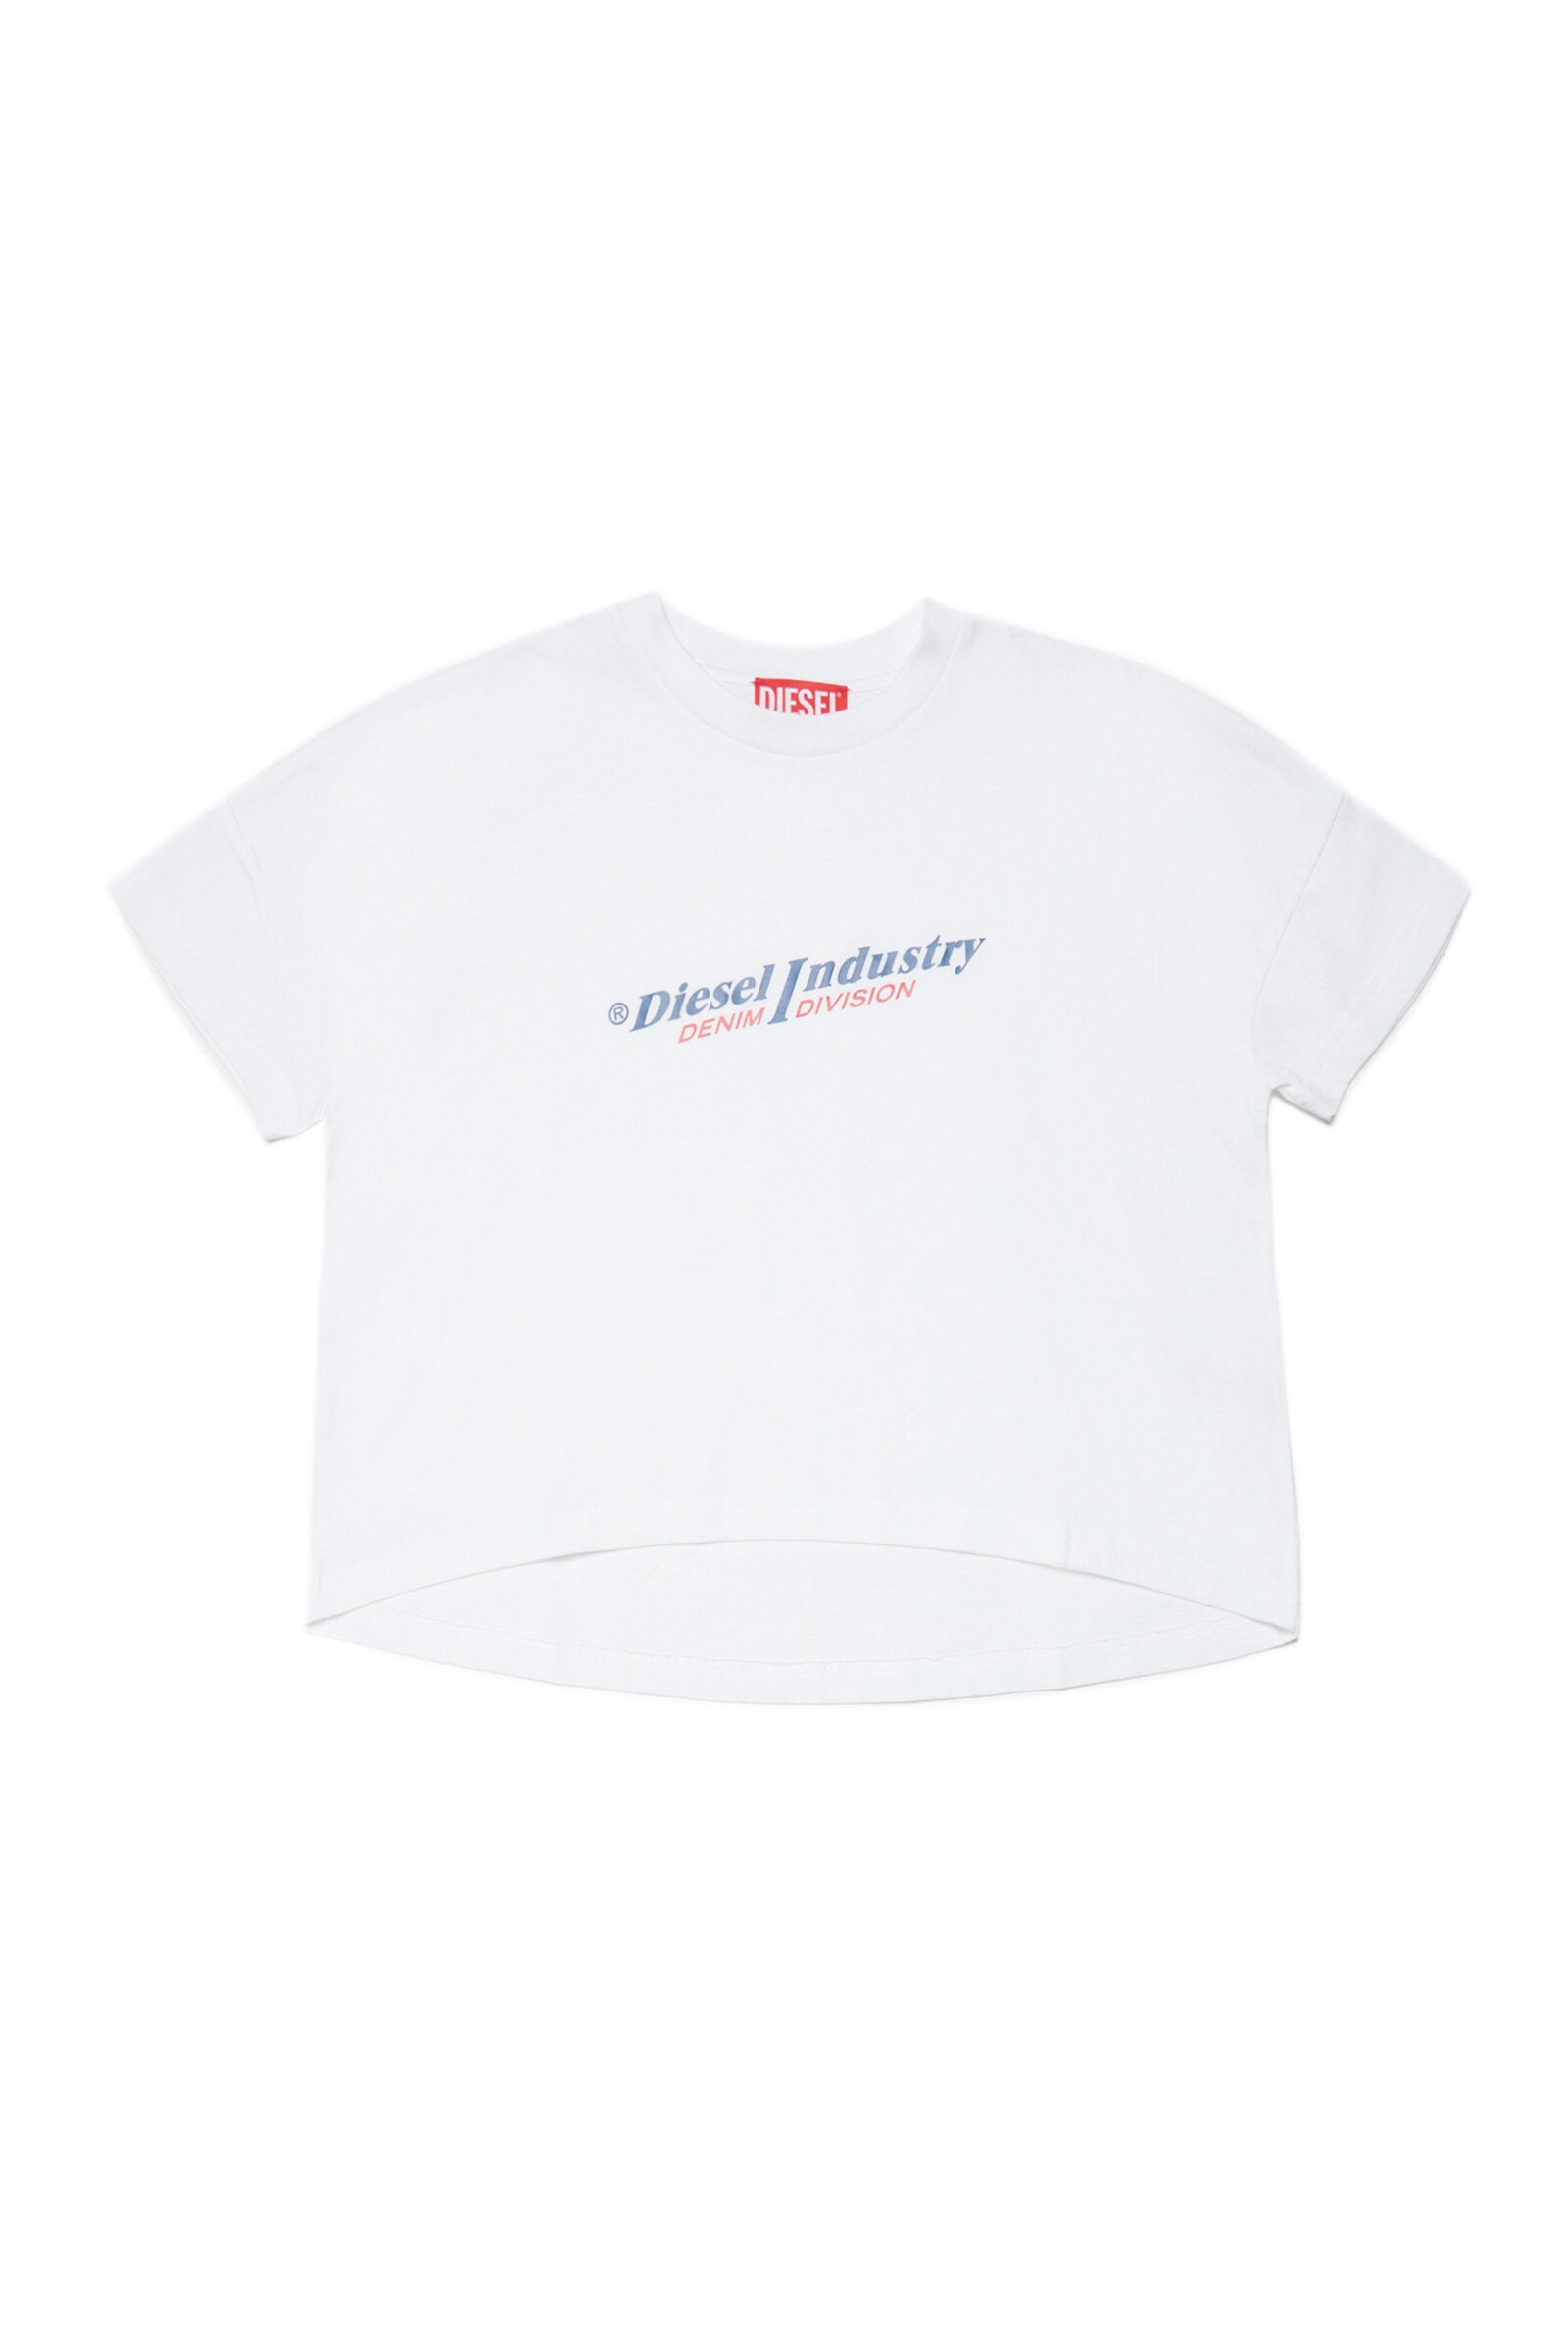 White cropped jersey T-shirt with Diesel Industry logo